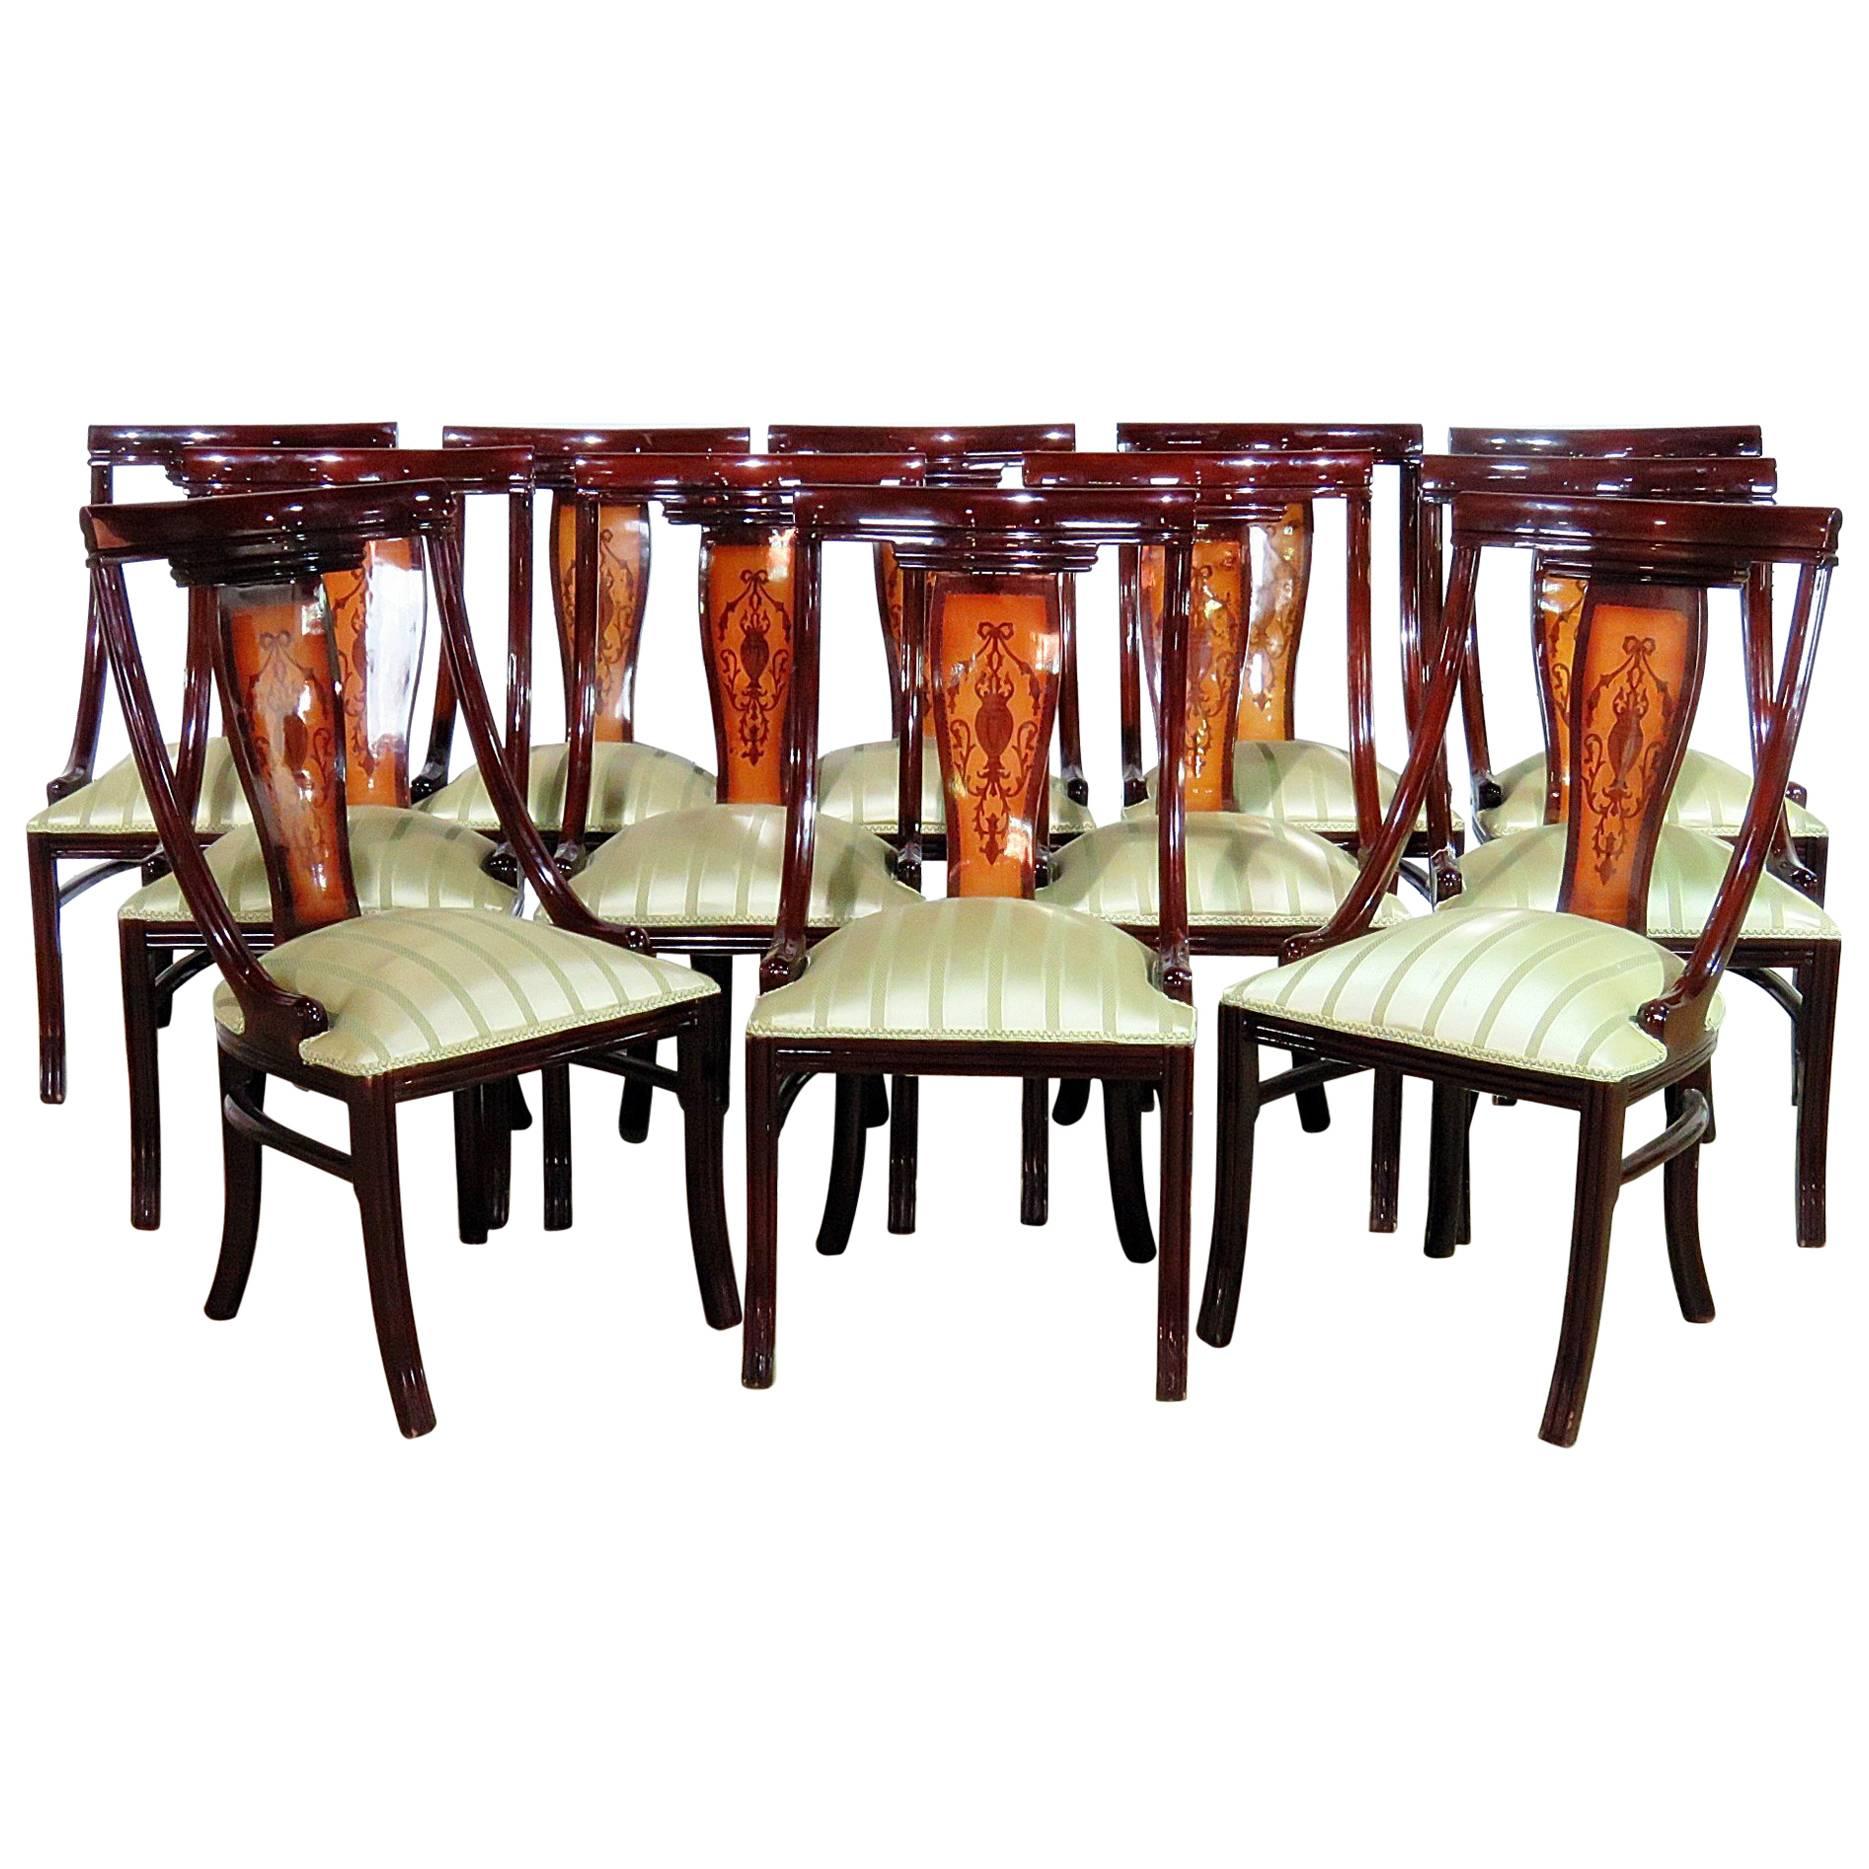 12 Adams Style Dining Chairs